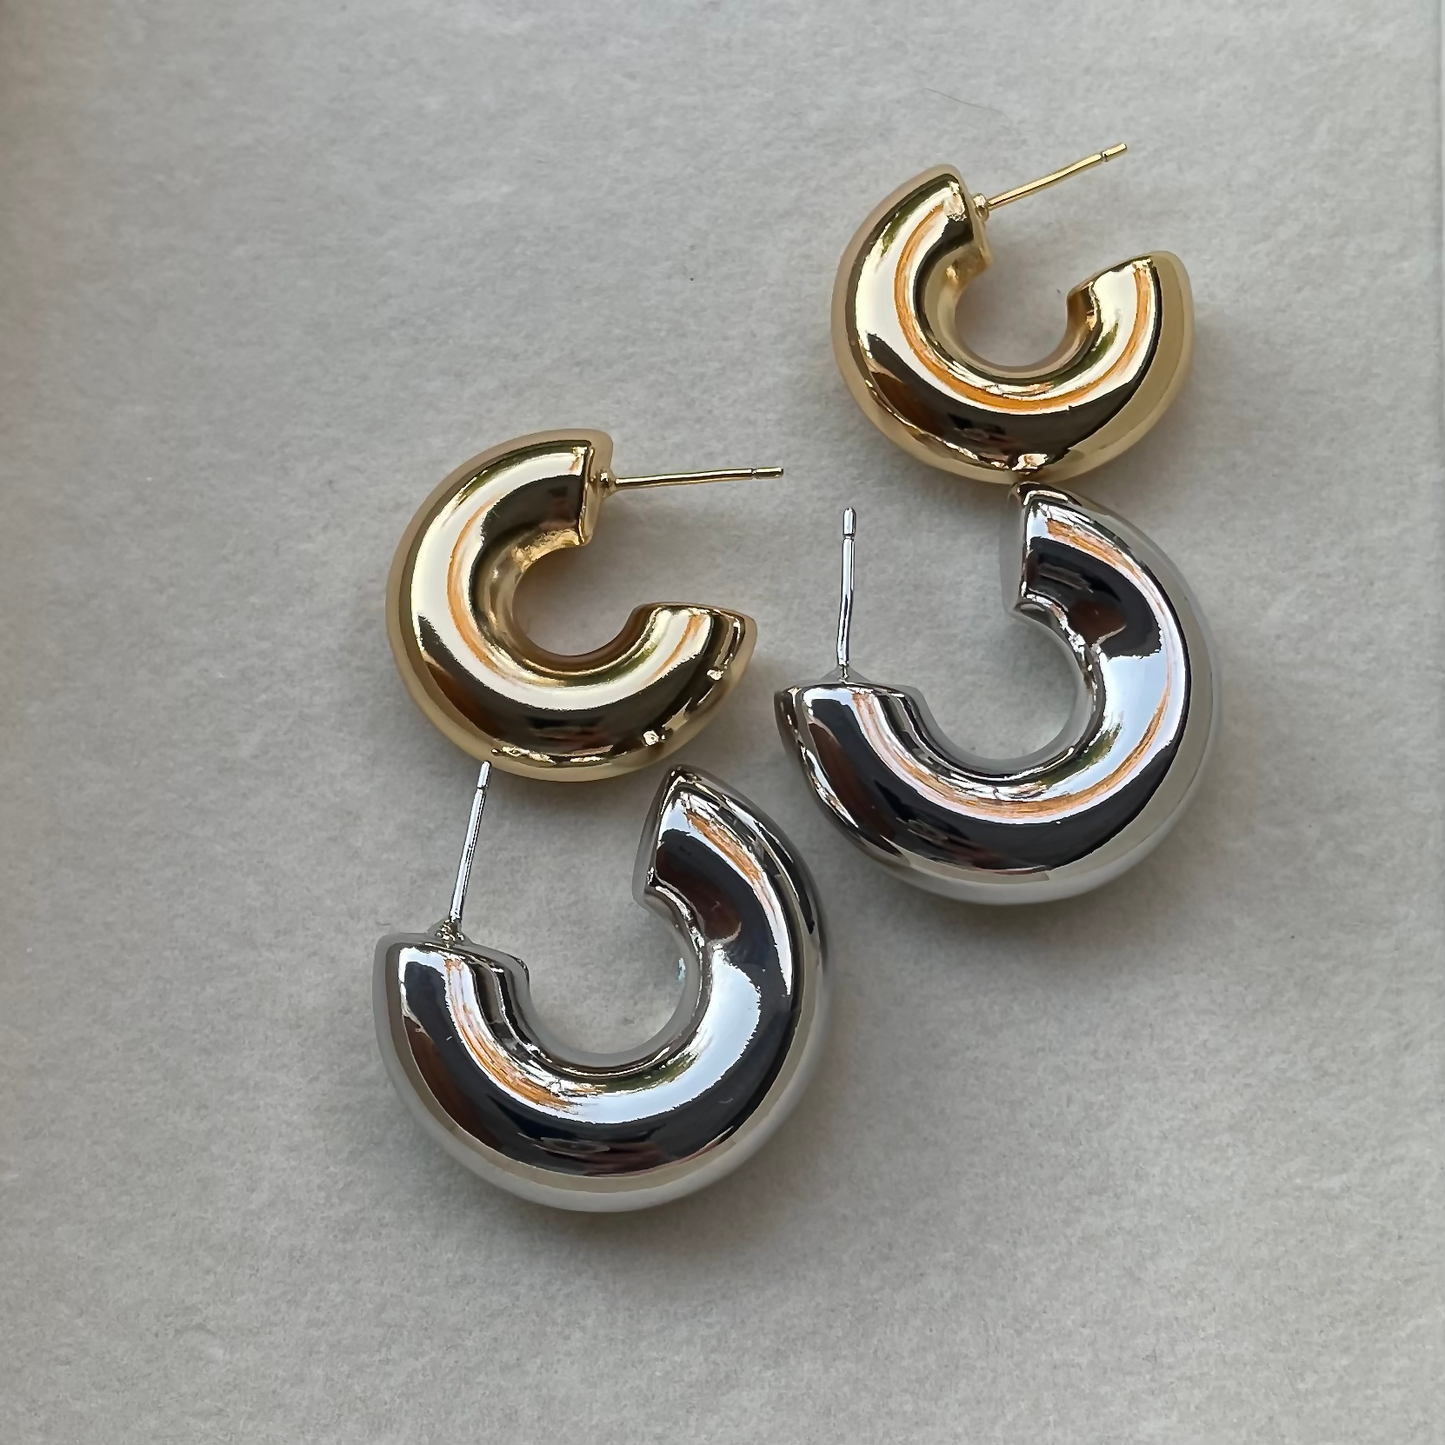 Hot Stuff - Yellow Gold Filled Hoops